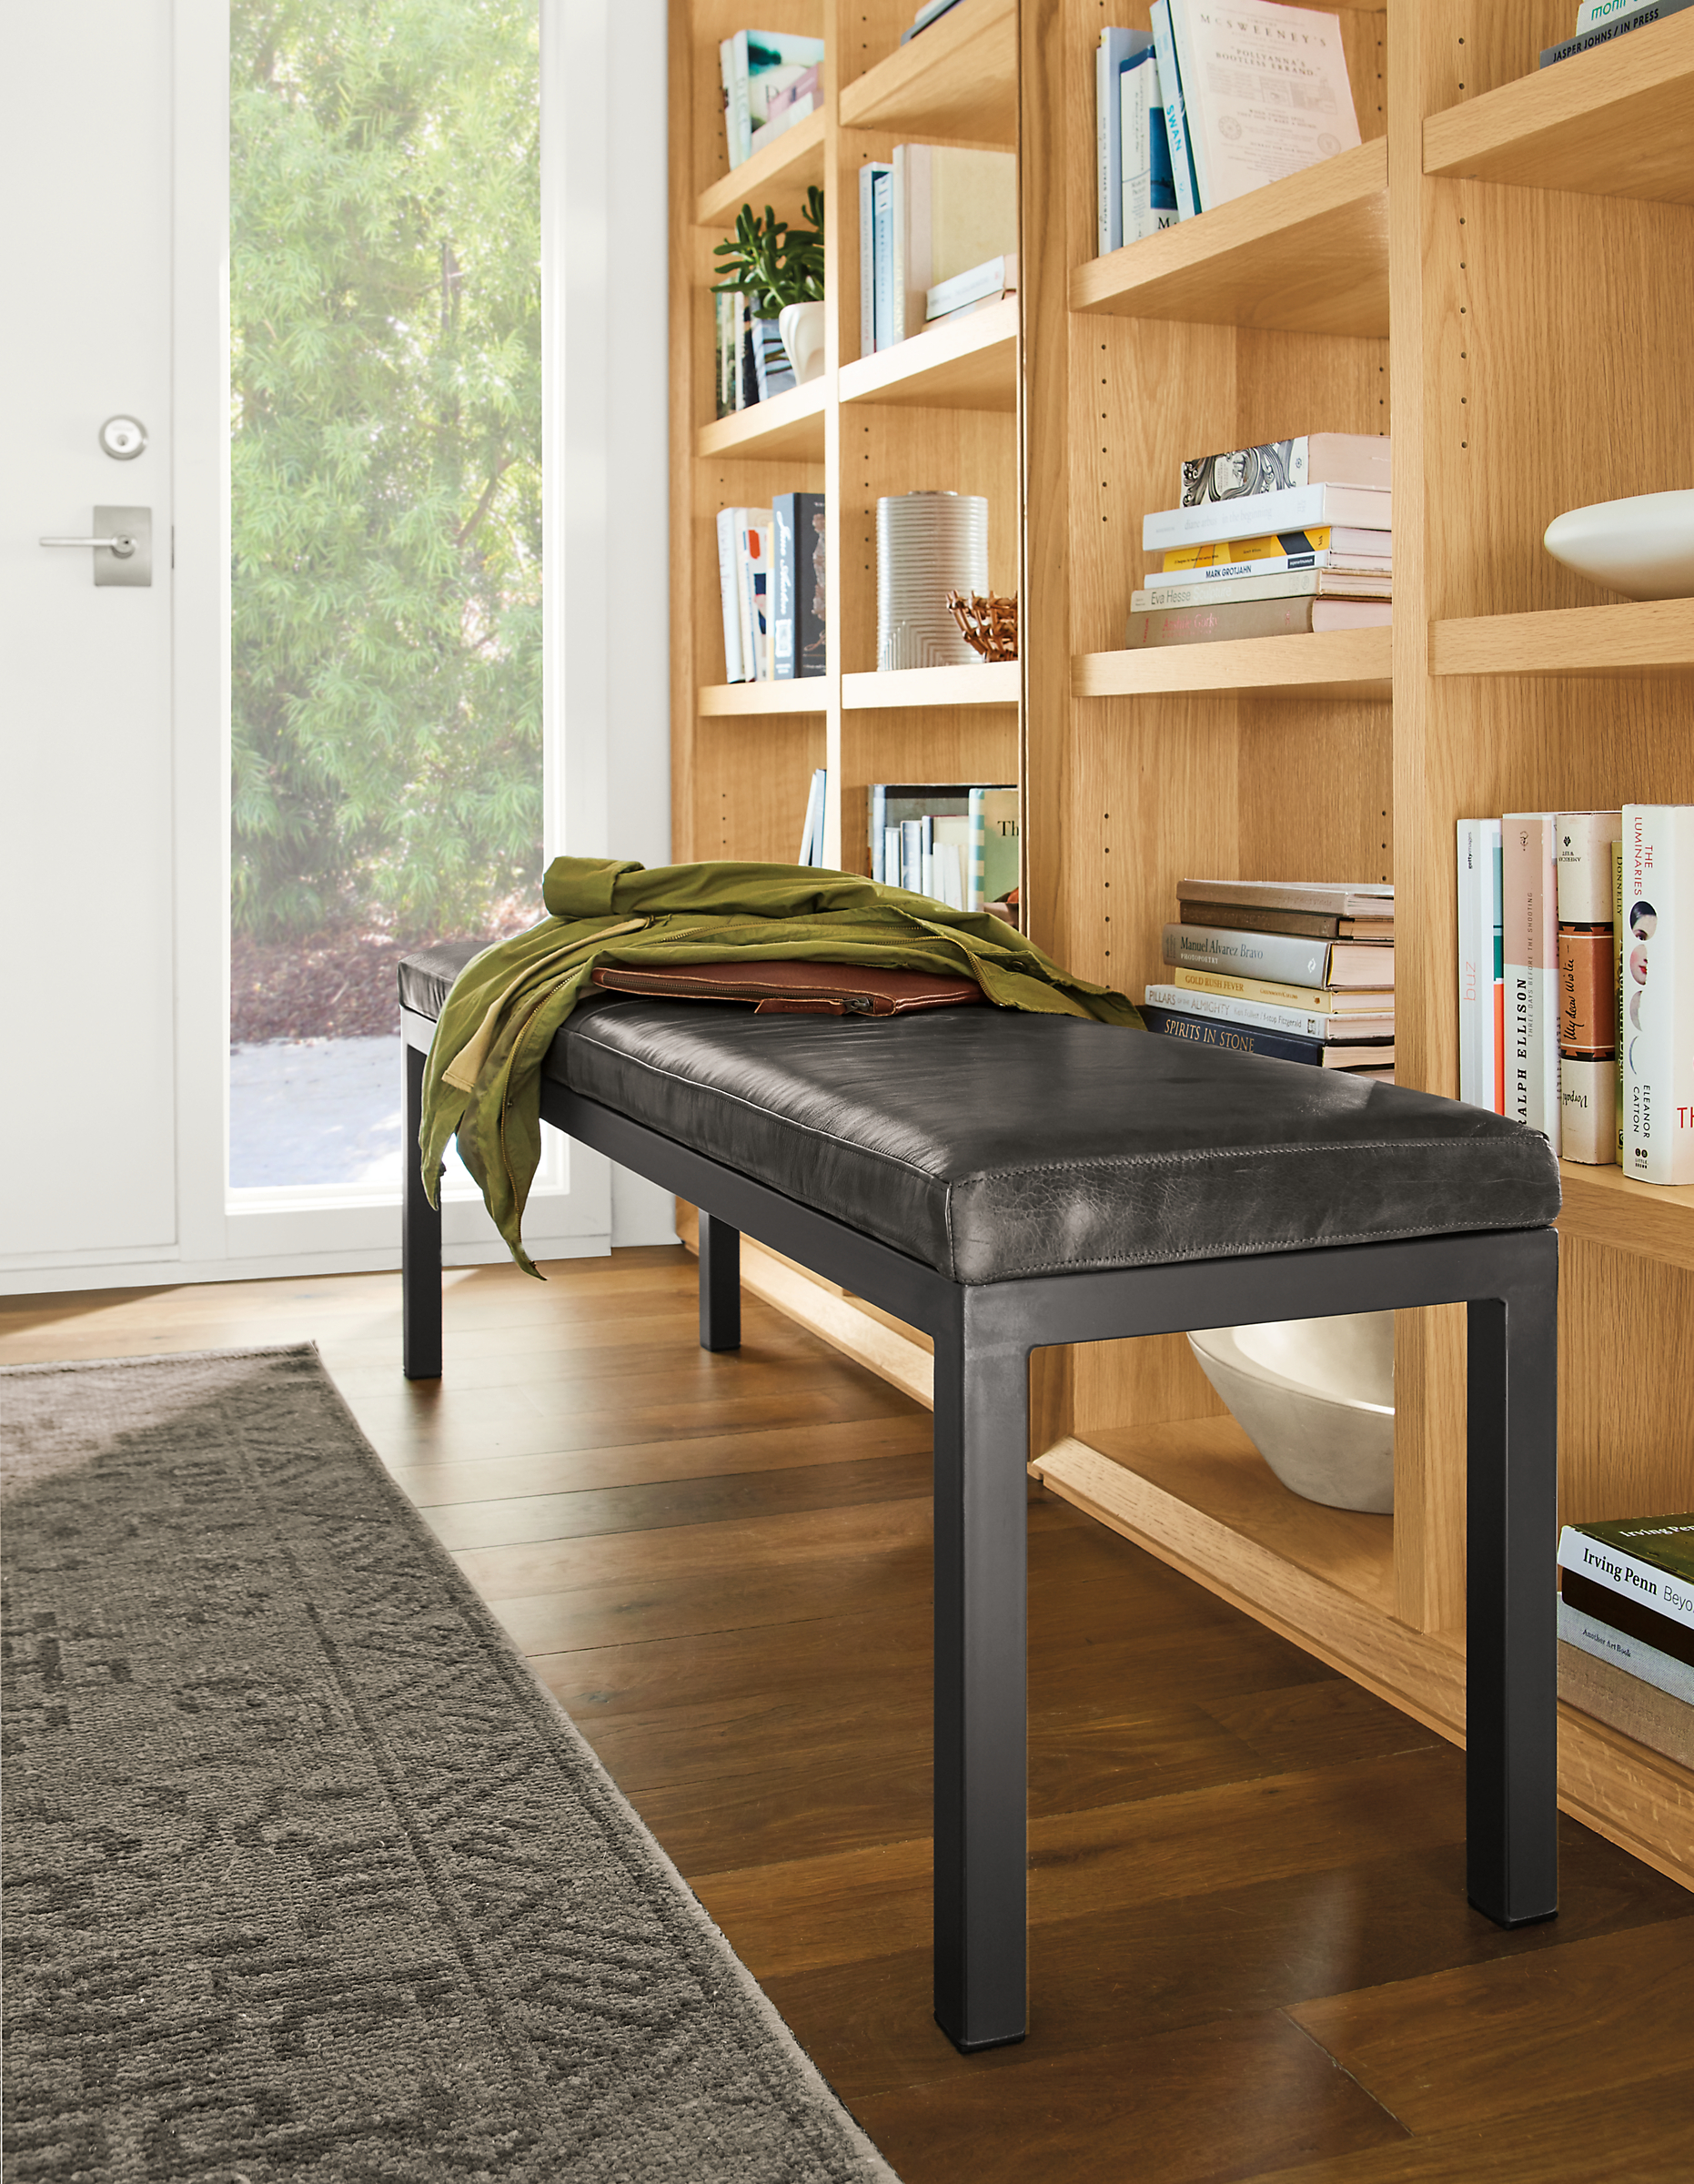 Detail of Parsons bench in vento smoke leather in entryway with Lennox bookcases.